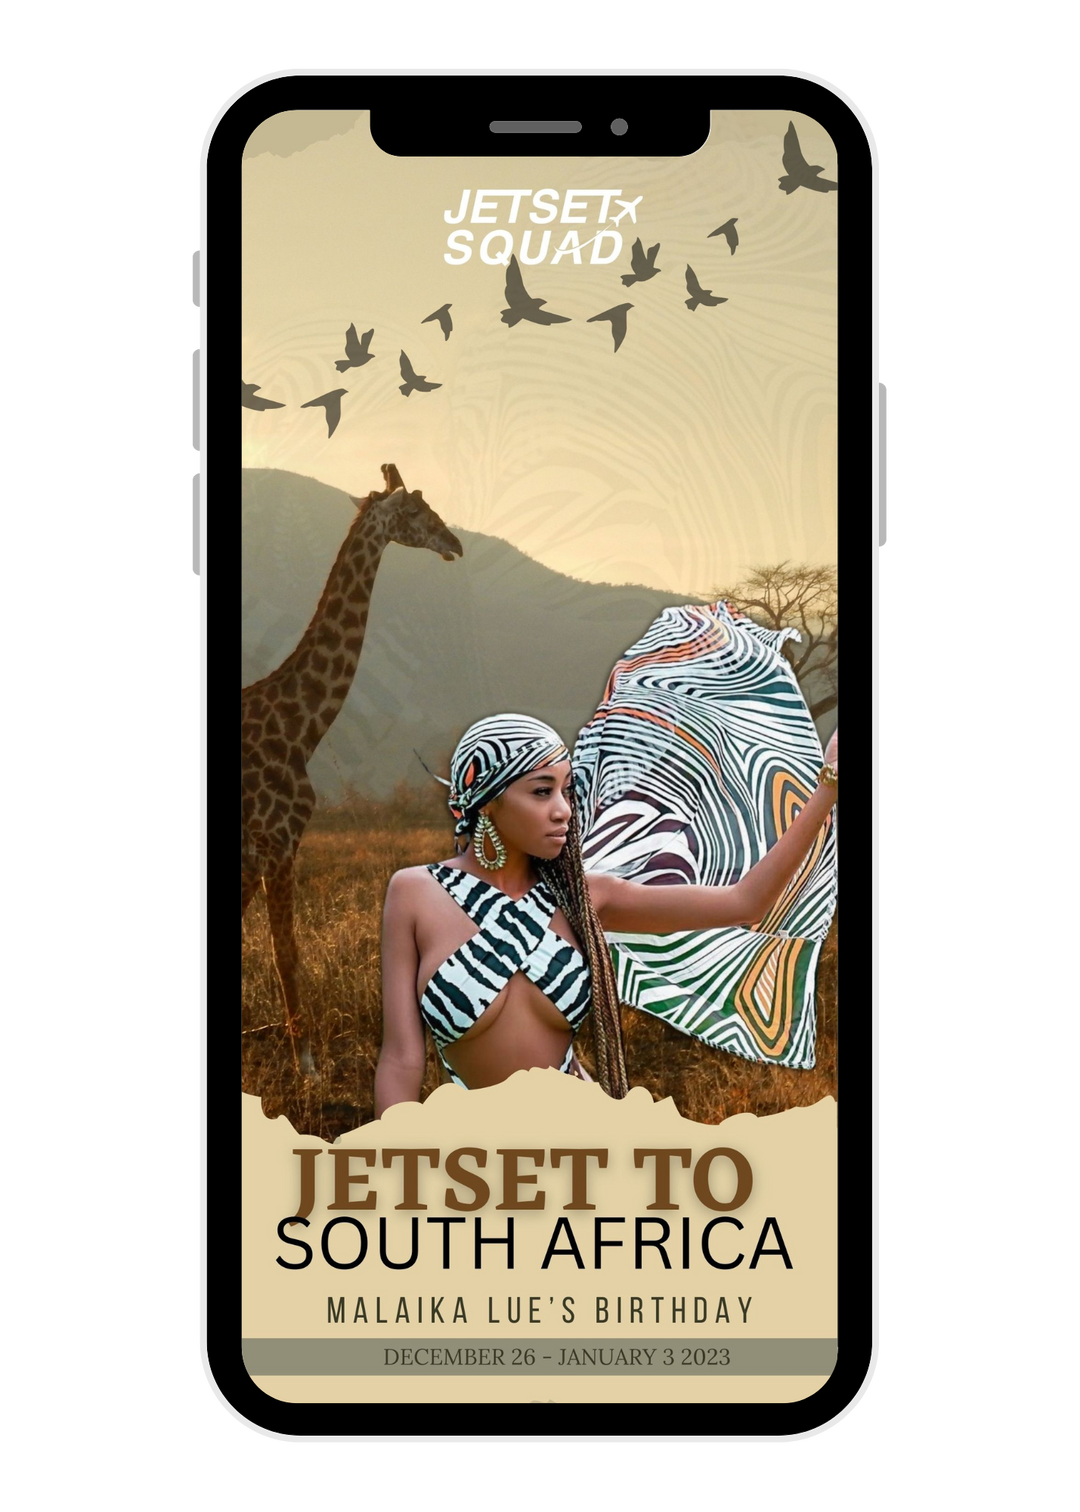 JETSET TO SOUTH AFRICA TRAVEL GUIDE